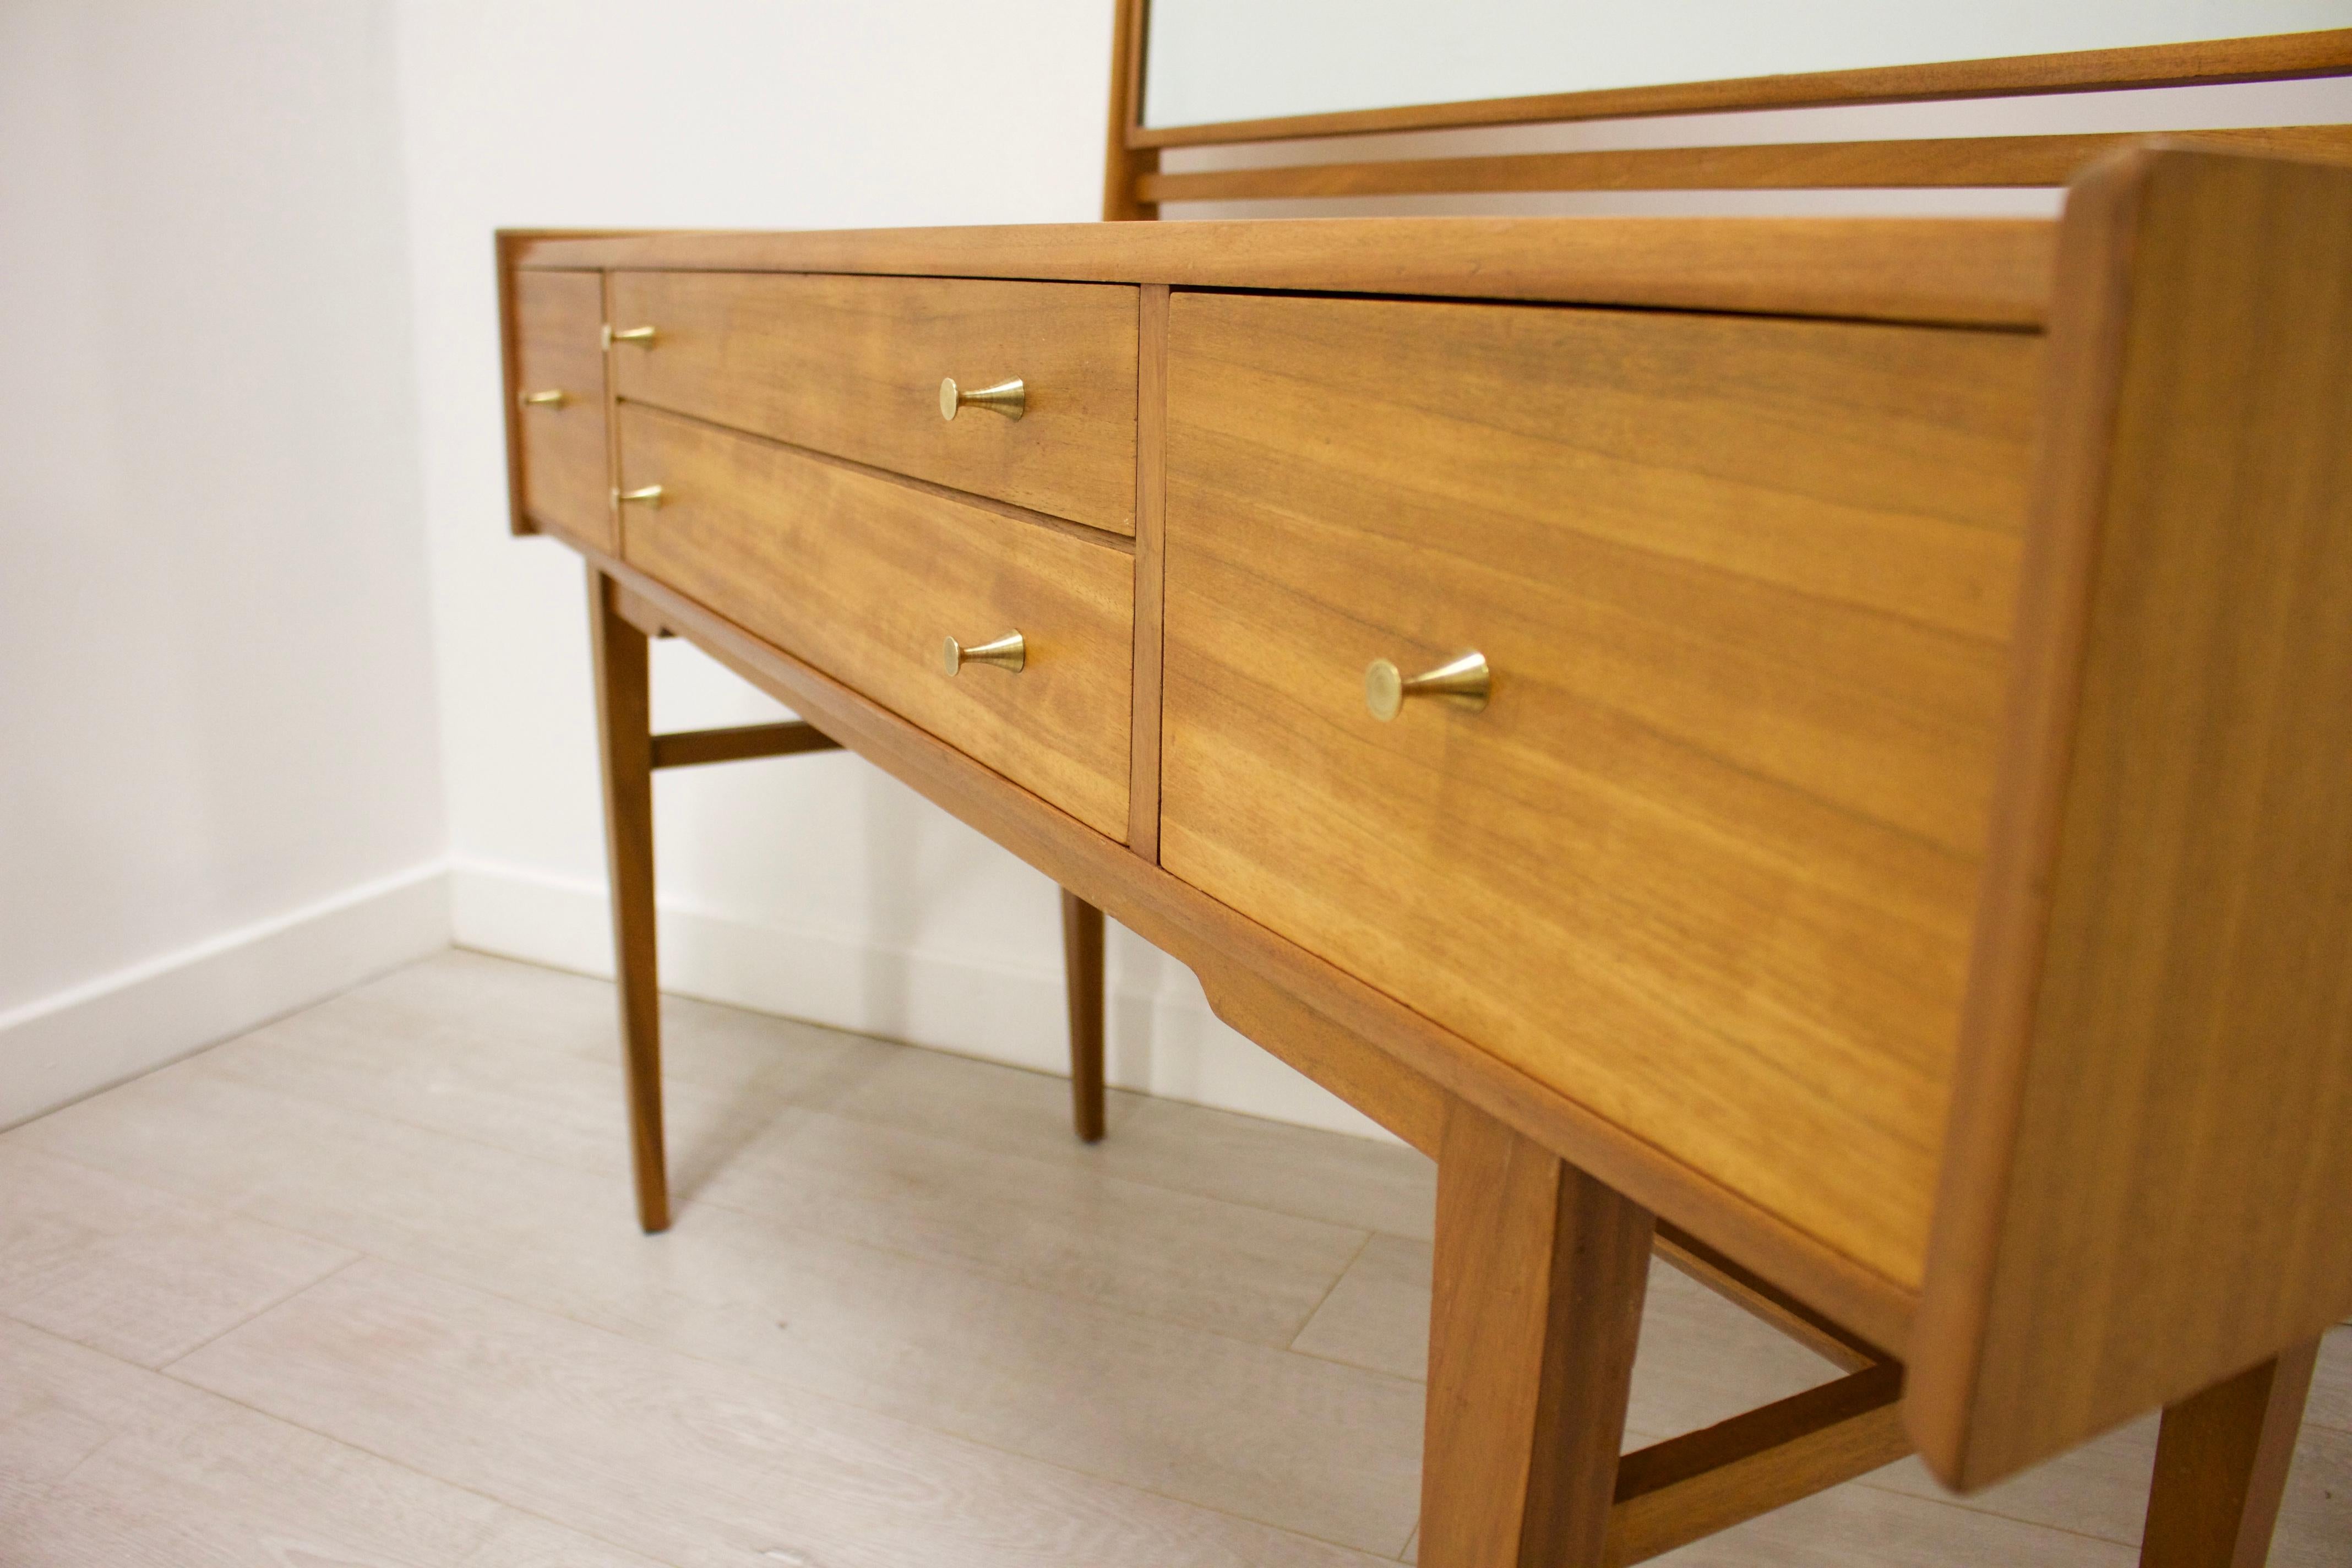 Midcentury Walnut Dressing Table from a. Younger Ltd., 1960s (Britisch)